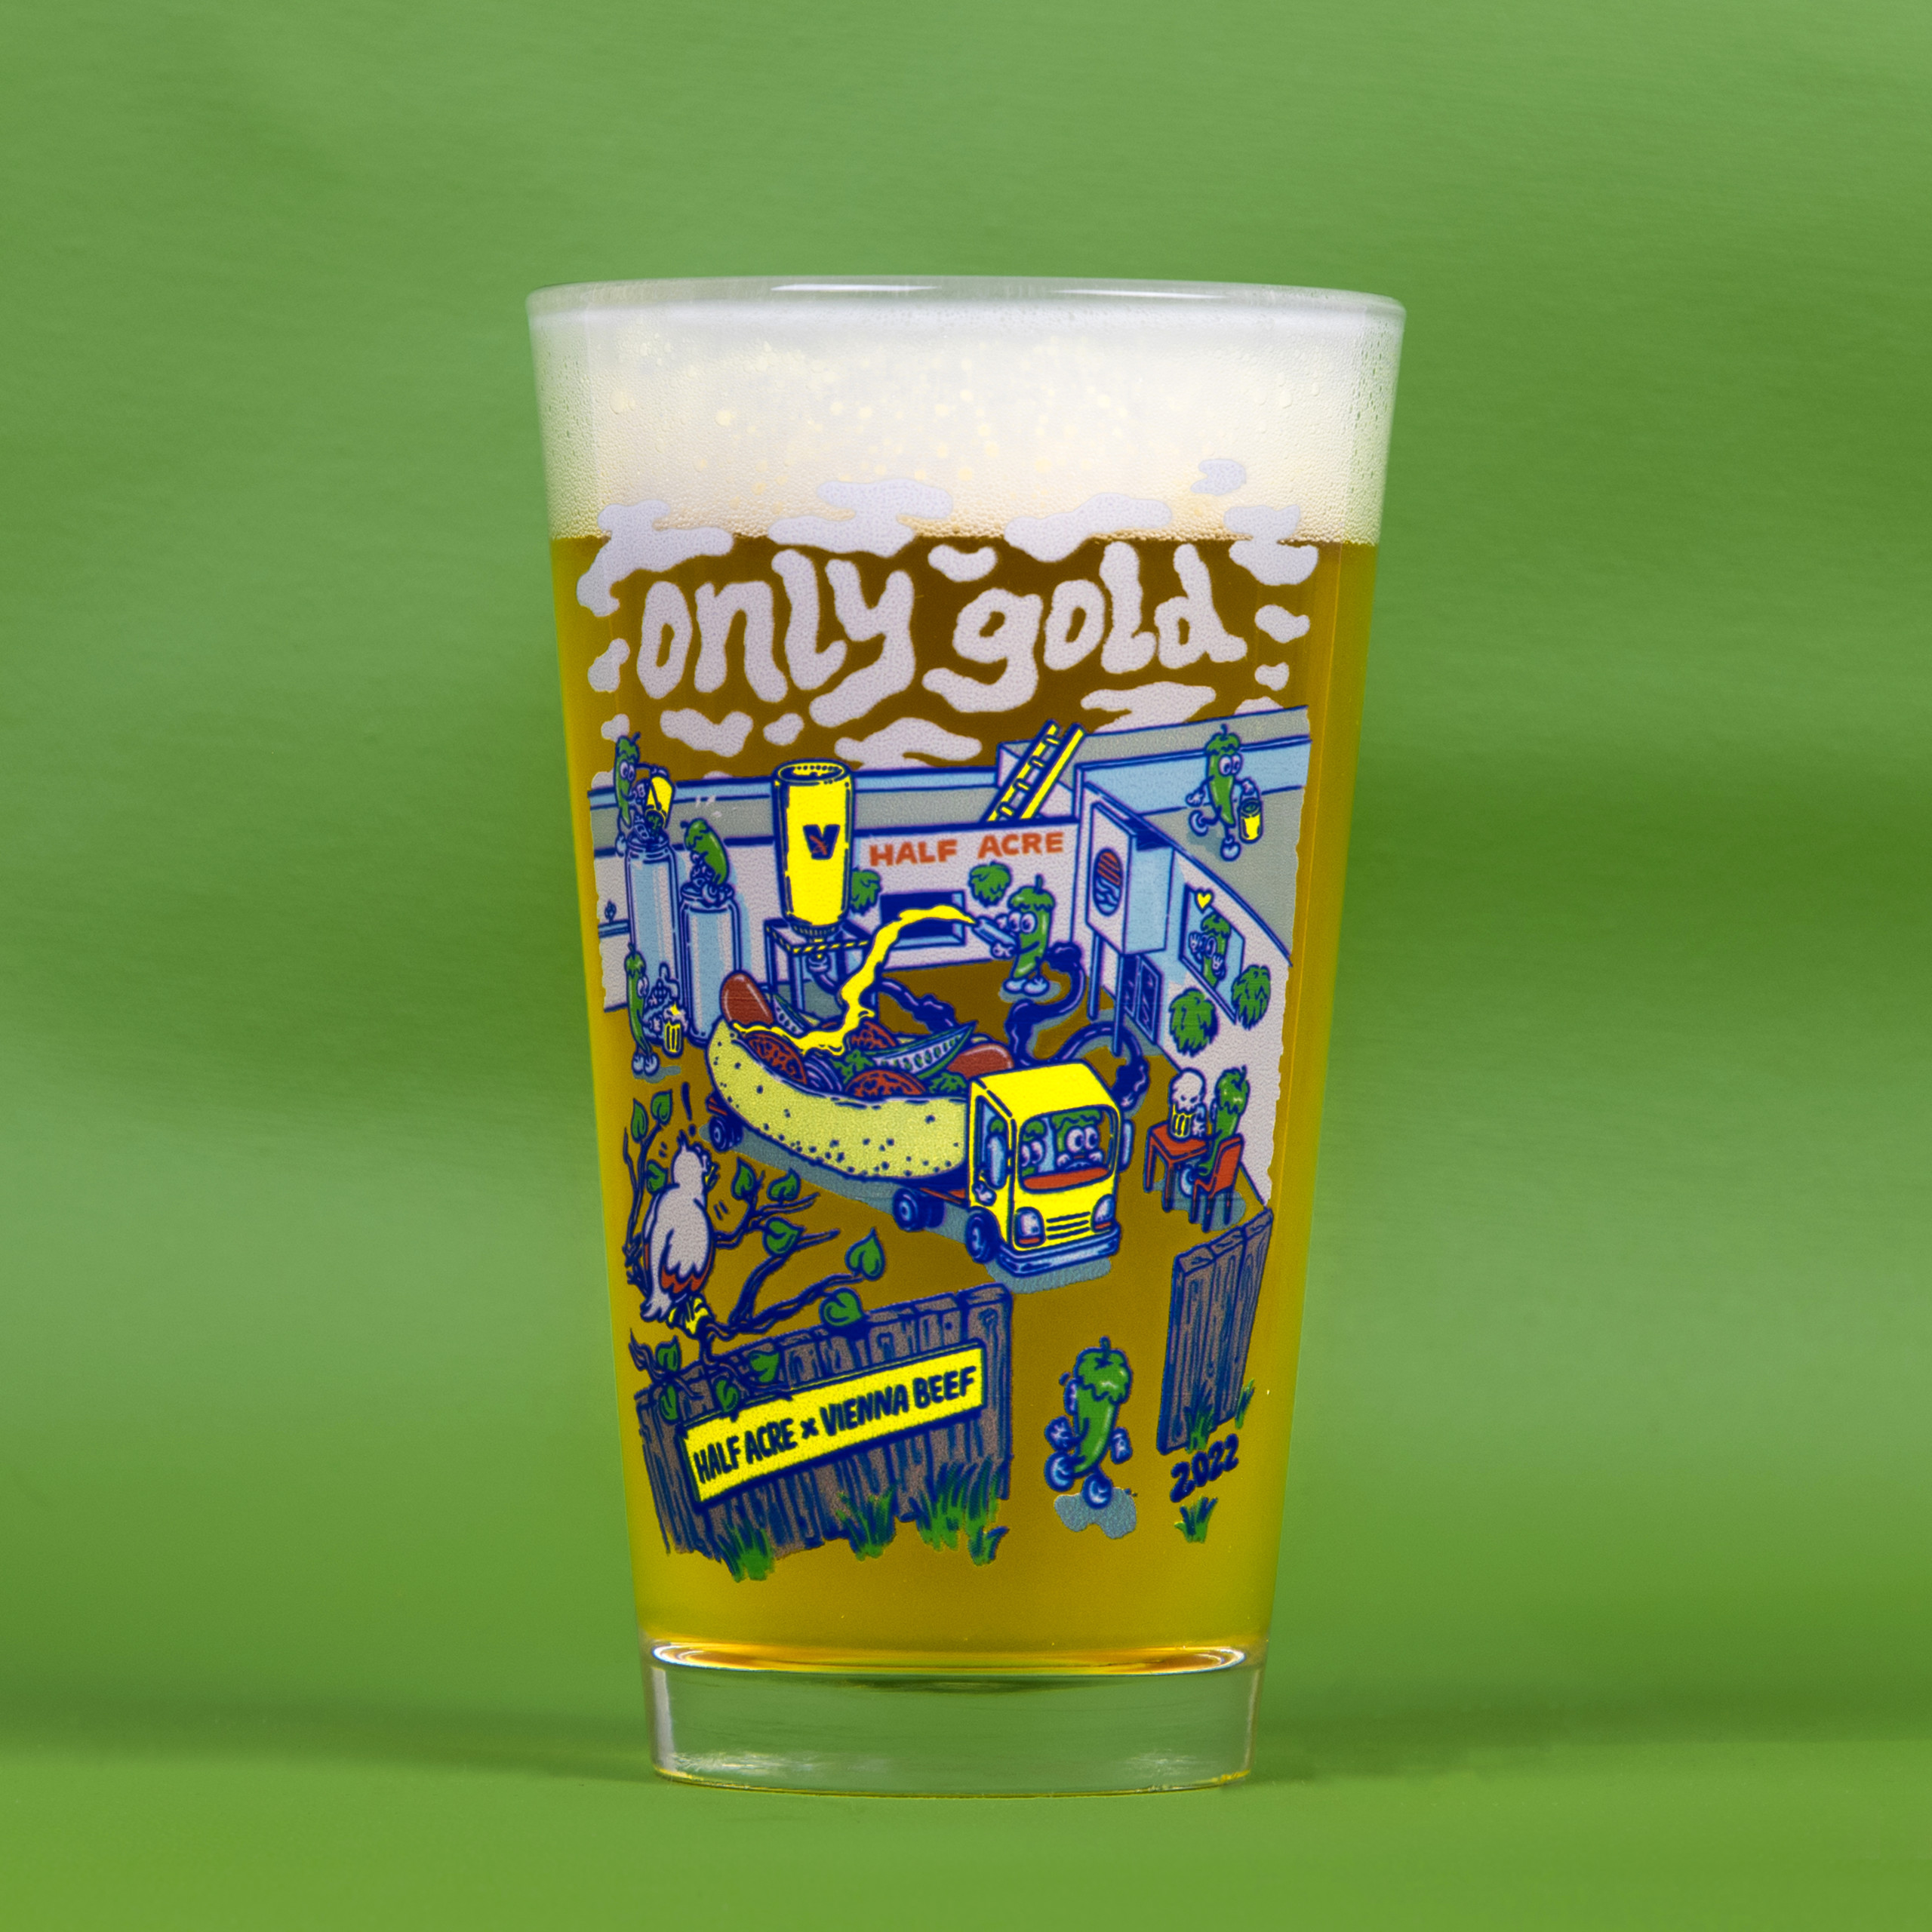 16oz Only Gold Glass